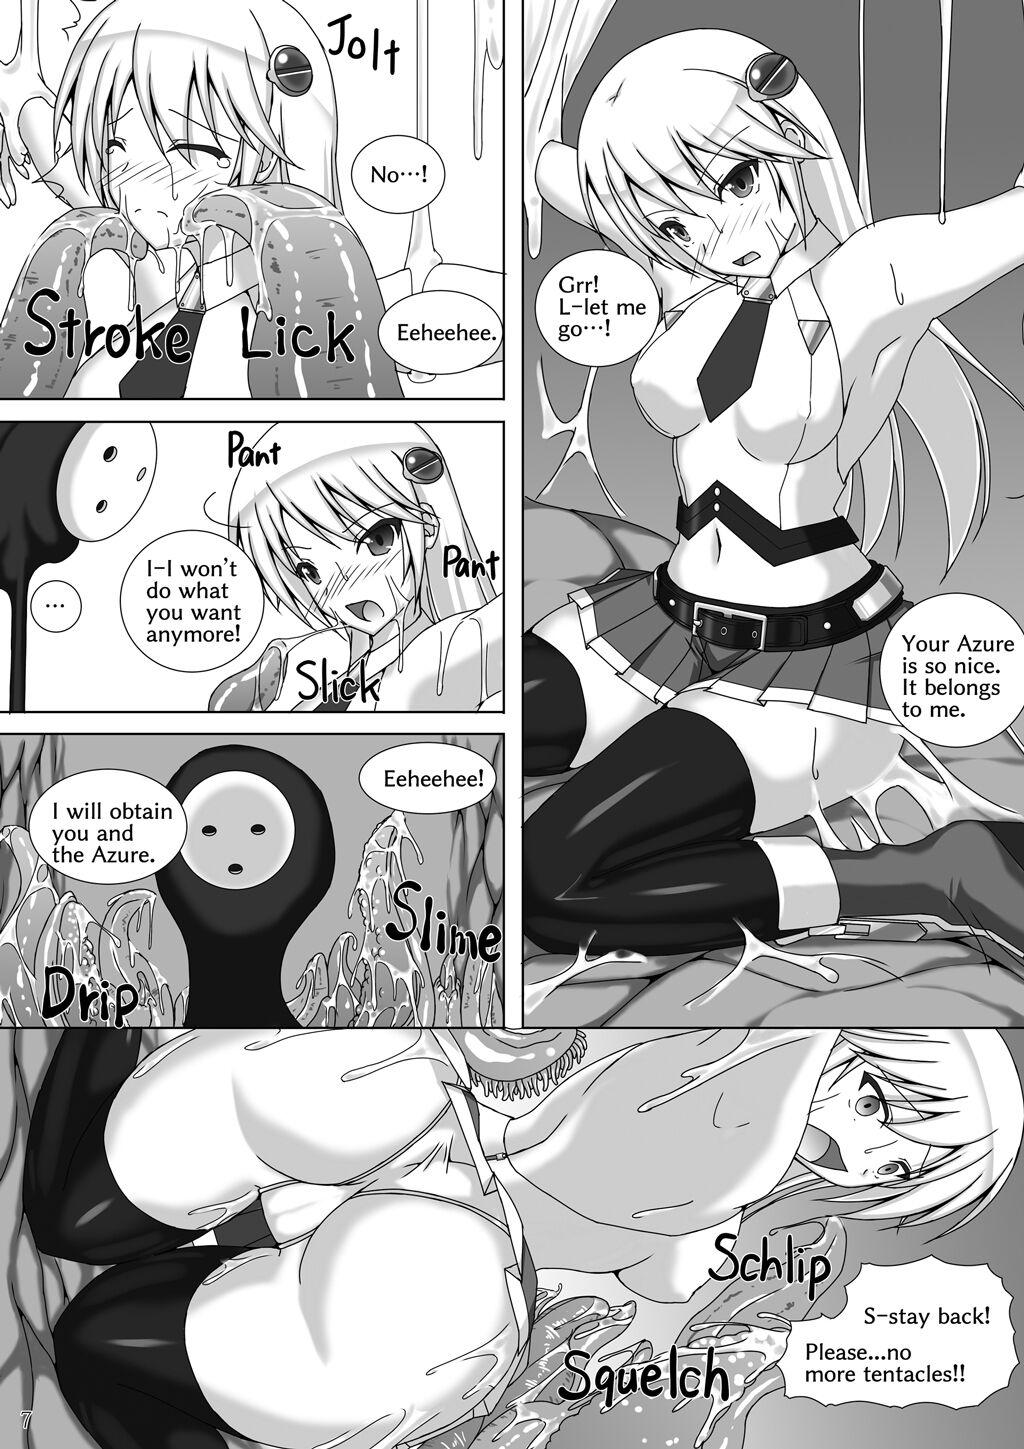 Licking Pussy Noel Doesn't hate Arakune Anymore! 3 - Blazblue Tight - Page 8